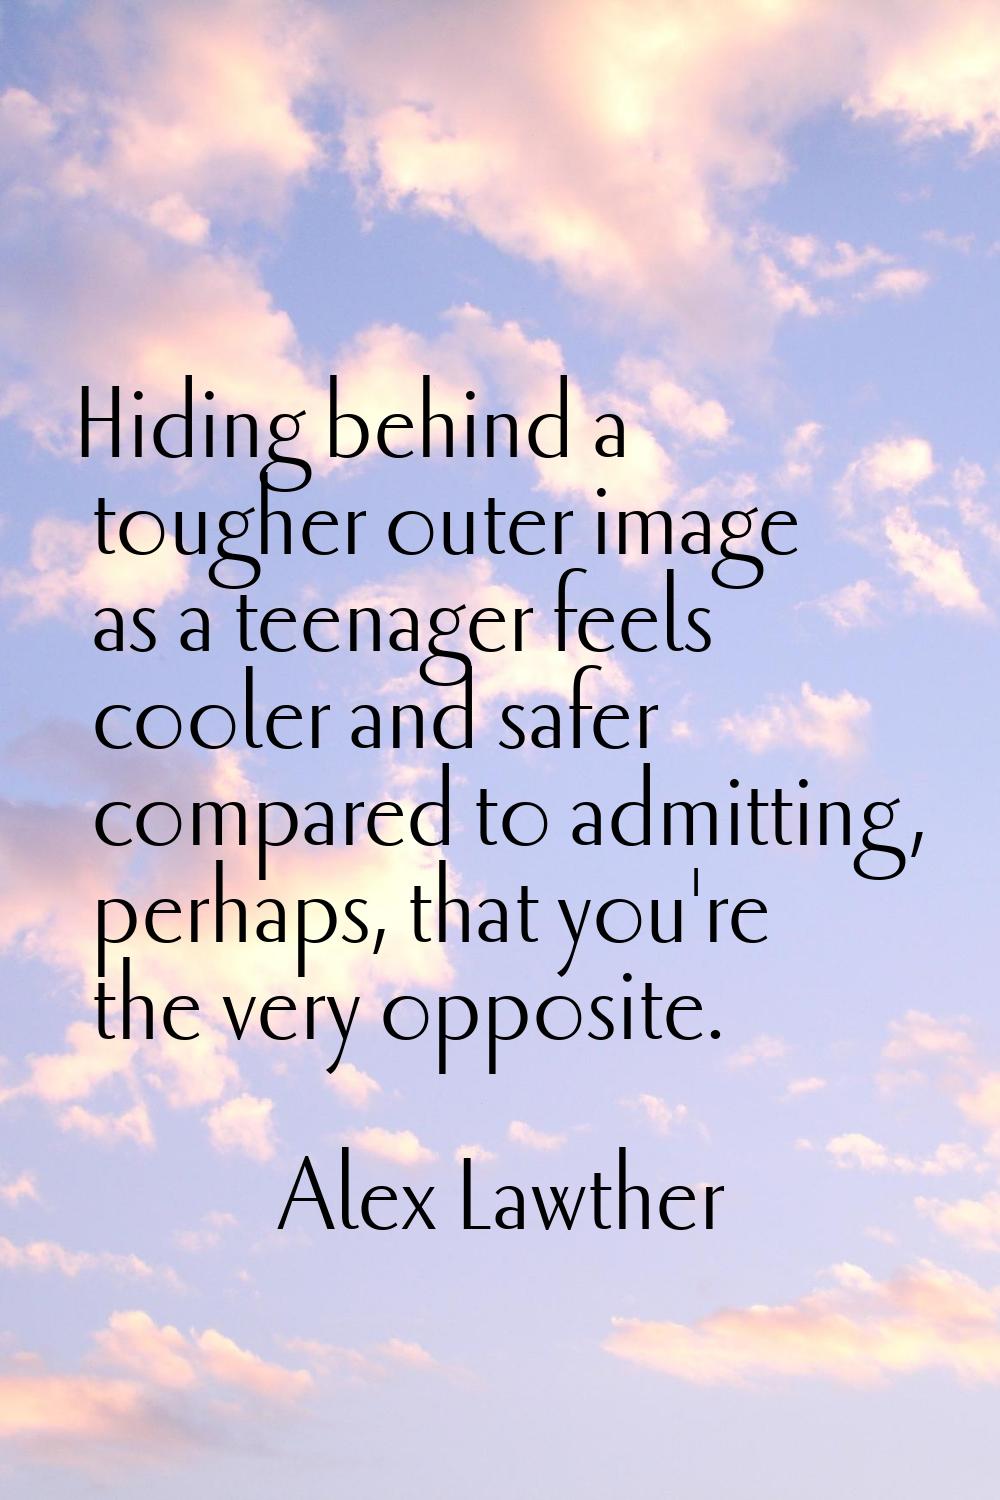 Hiding behind a tougher outer image as a teenager feels cooler and safer compared to admitting, per